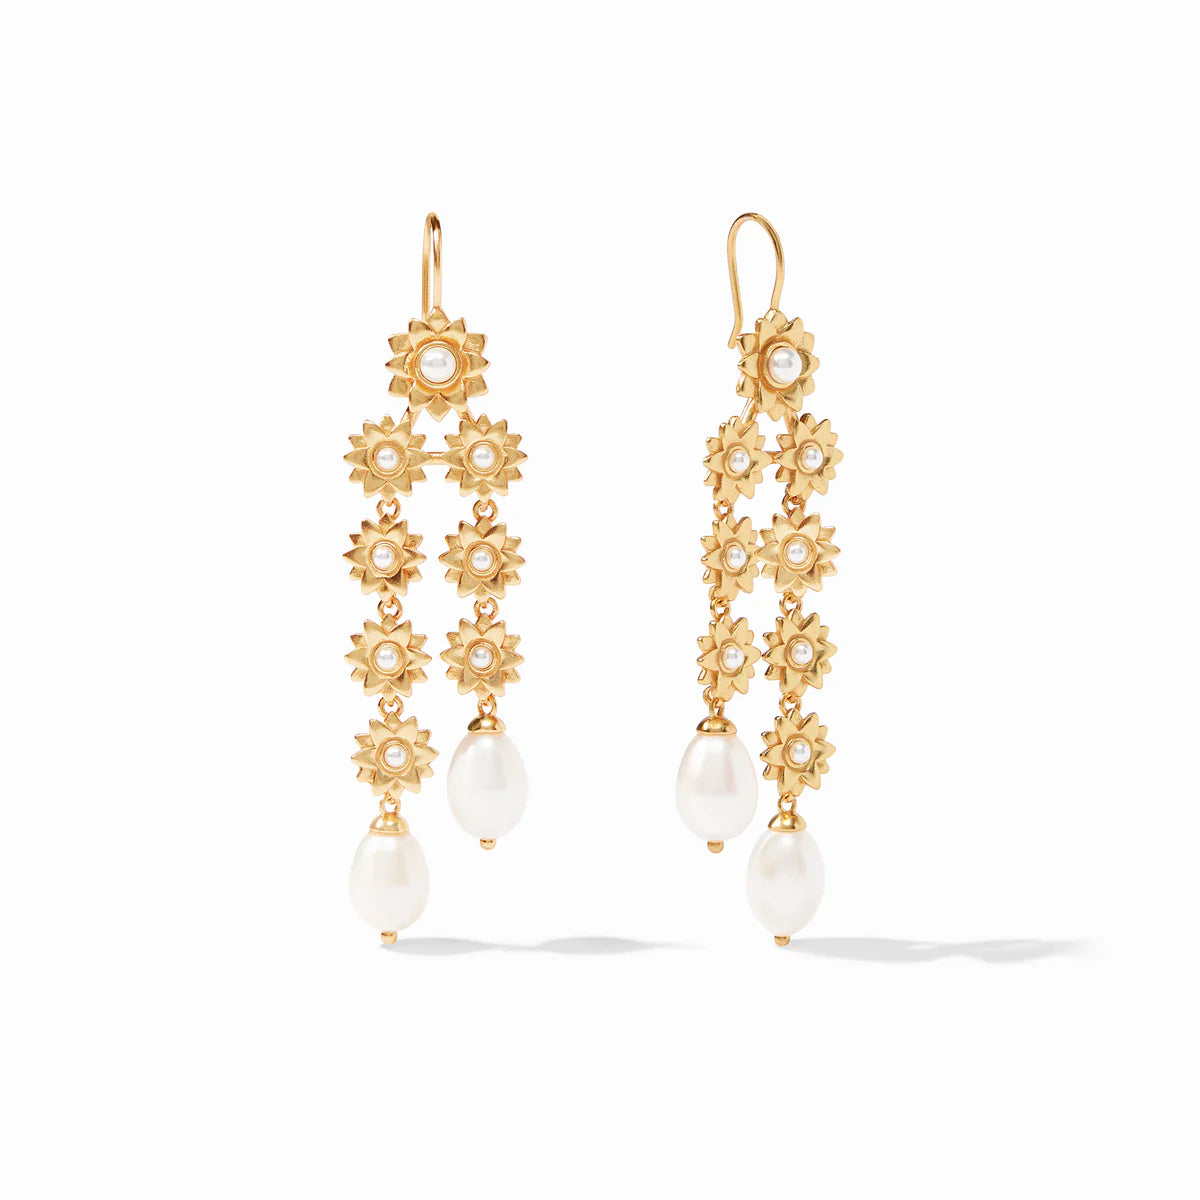 Flora Chandelier Earring by Julie Vos features a graceful gold dangle of florets, delicately finished with a pearl at the end. Length 2.65", 24K gold plate. Shop at The Painted Cottage an Annapolis boutique.